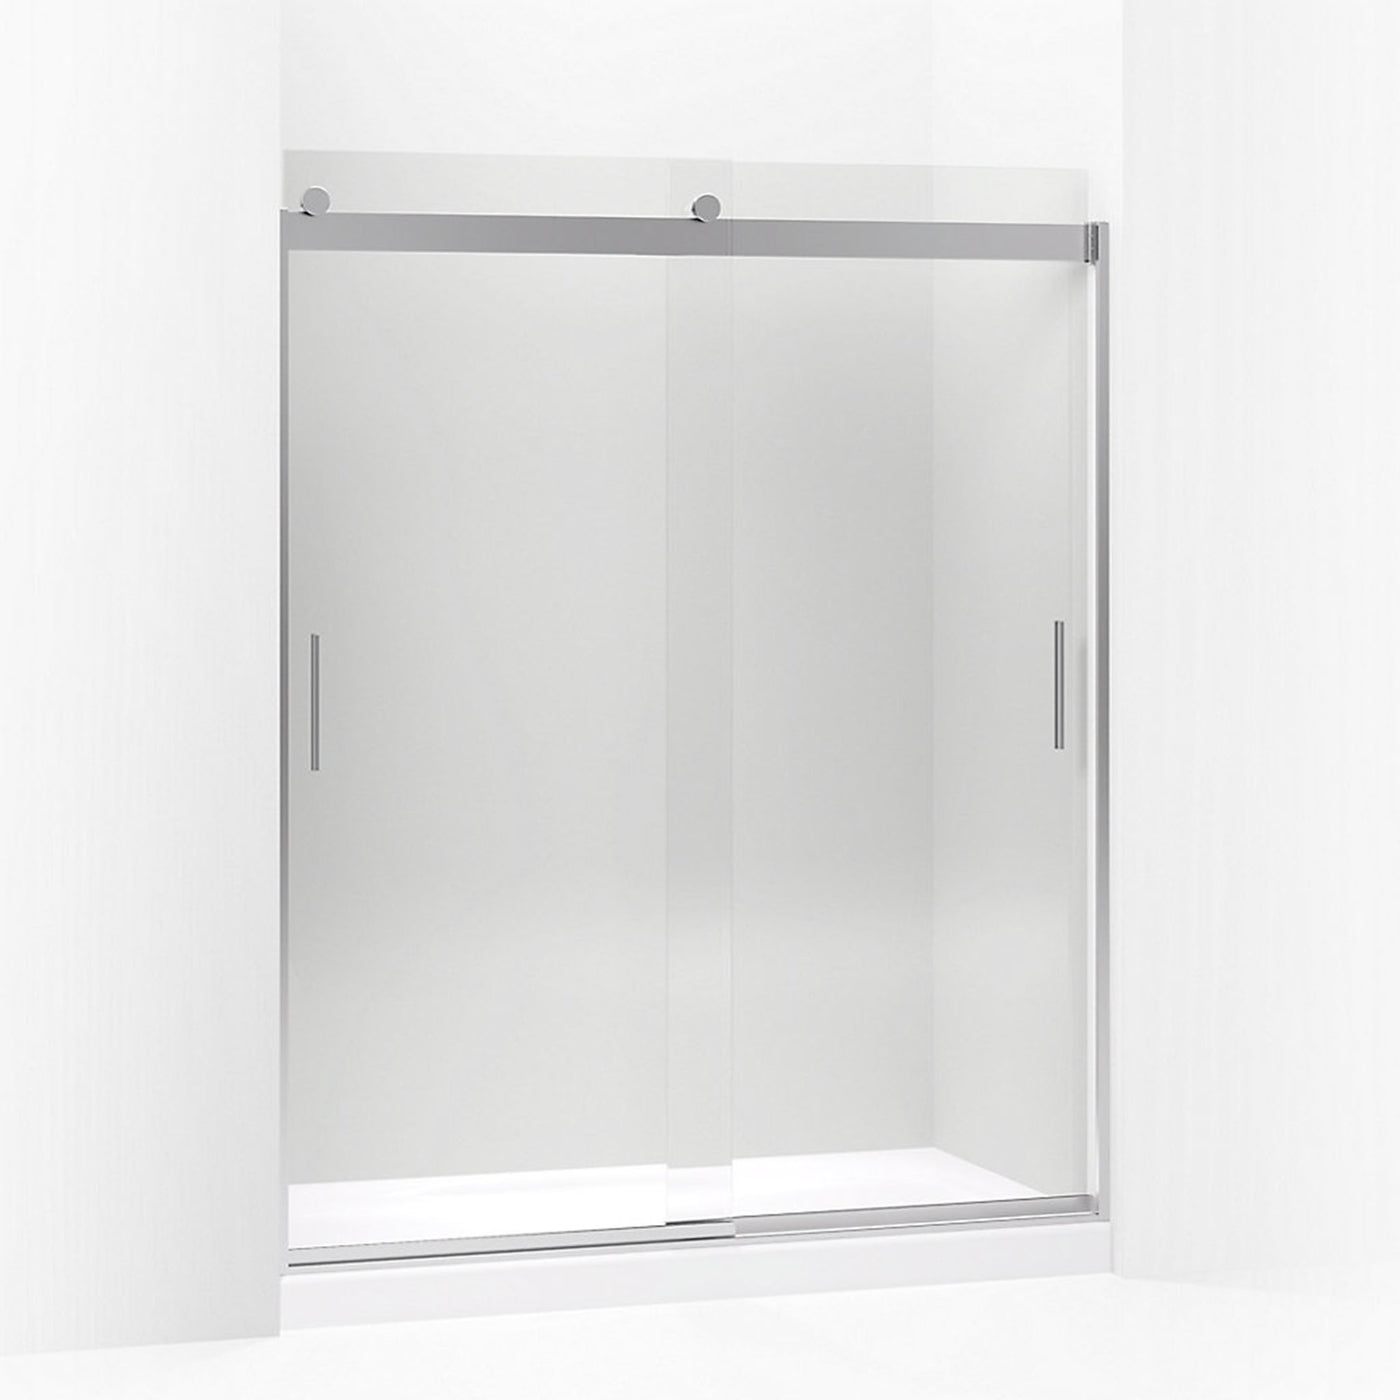 74" H x 56-5/8 - 59-5/8" W Levity® Sliding shower door with 3/8" thick Crystal Clear glass